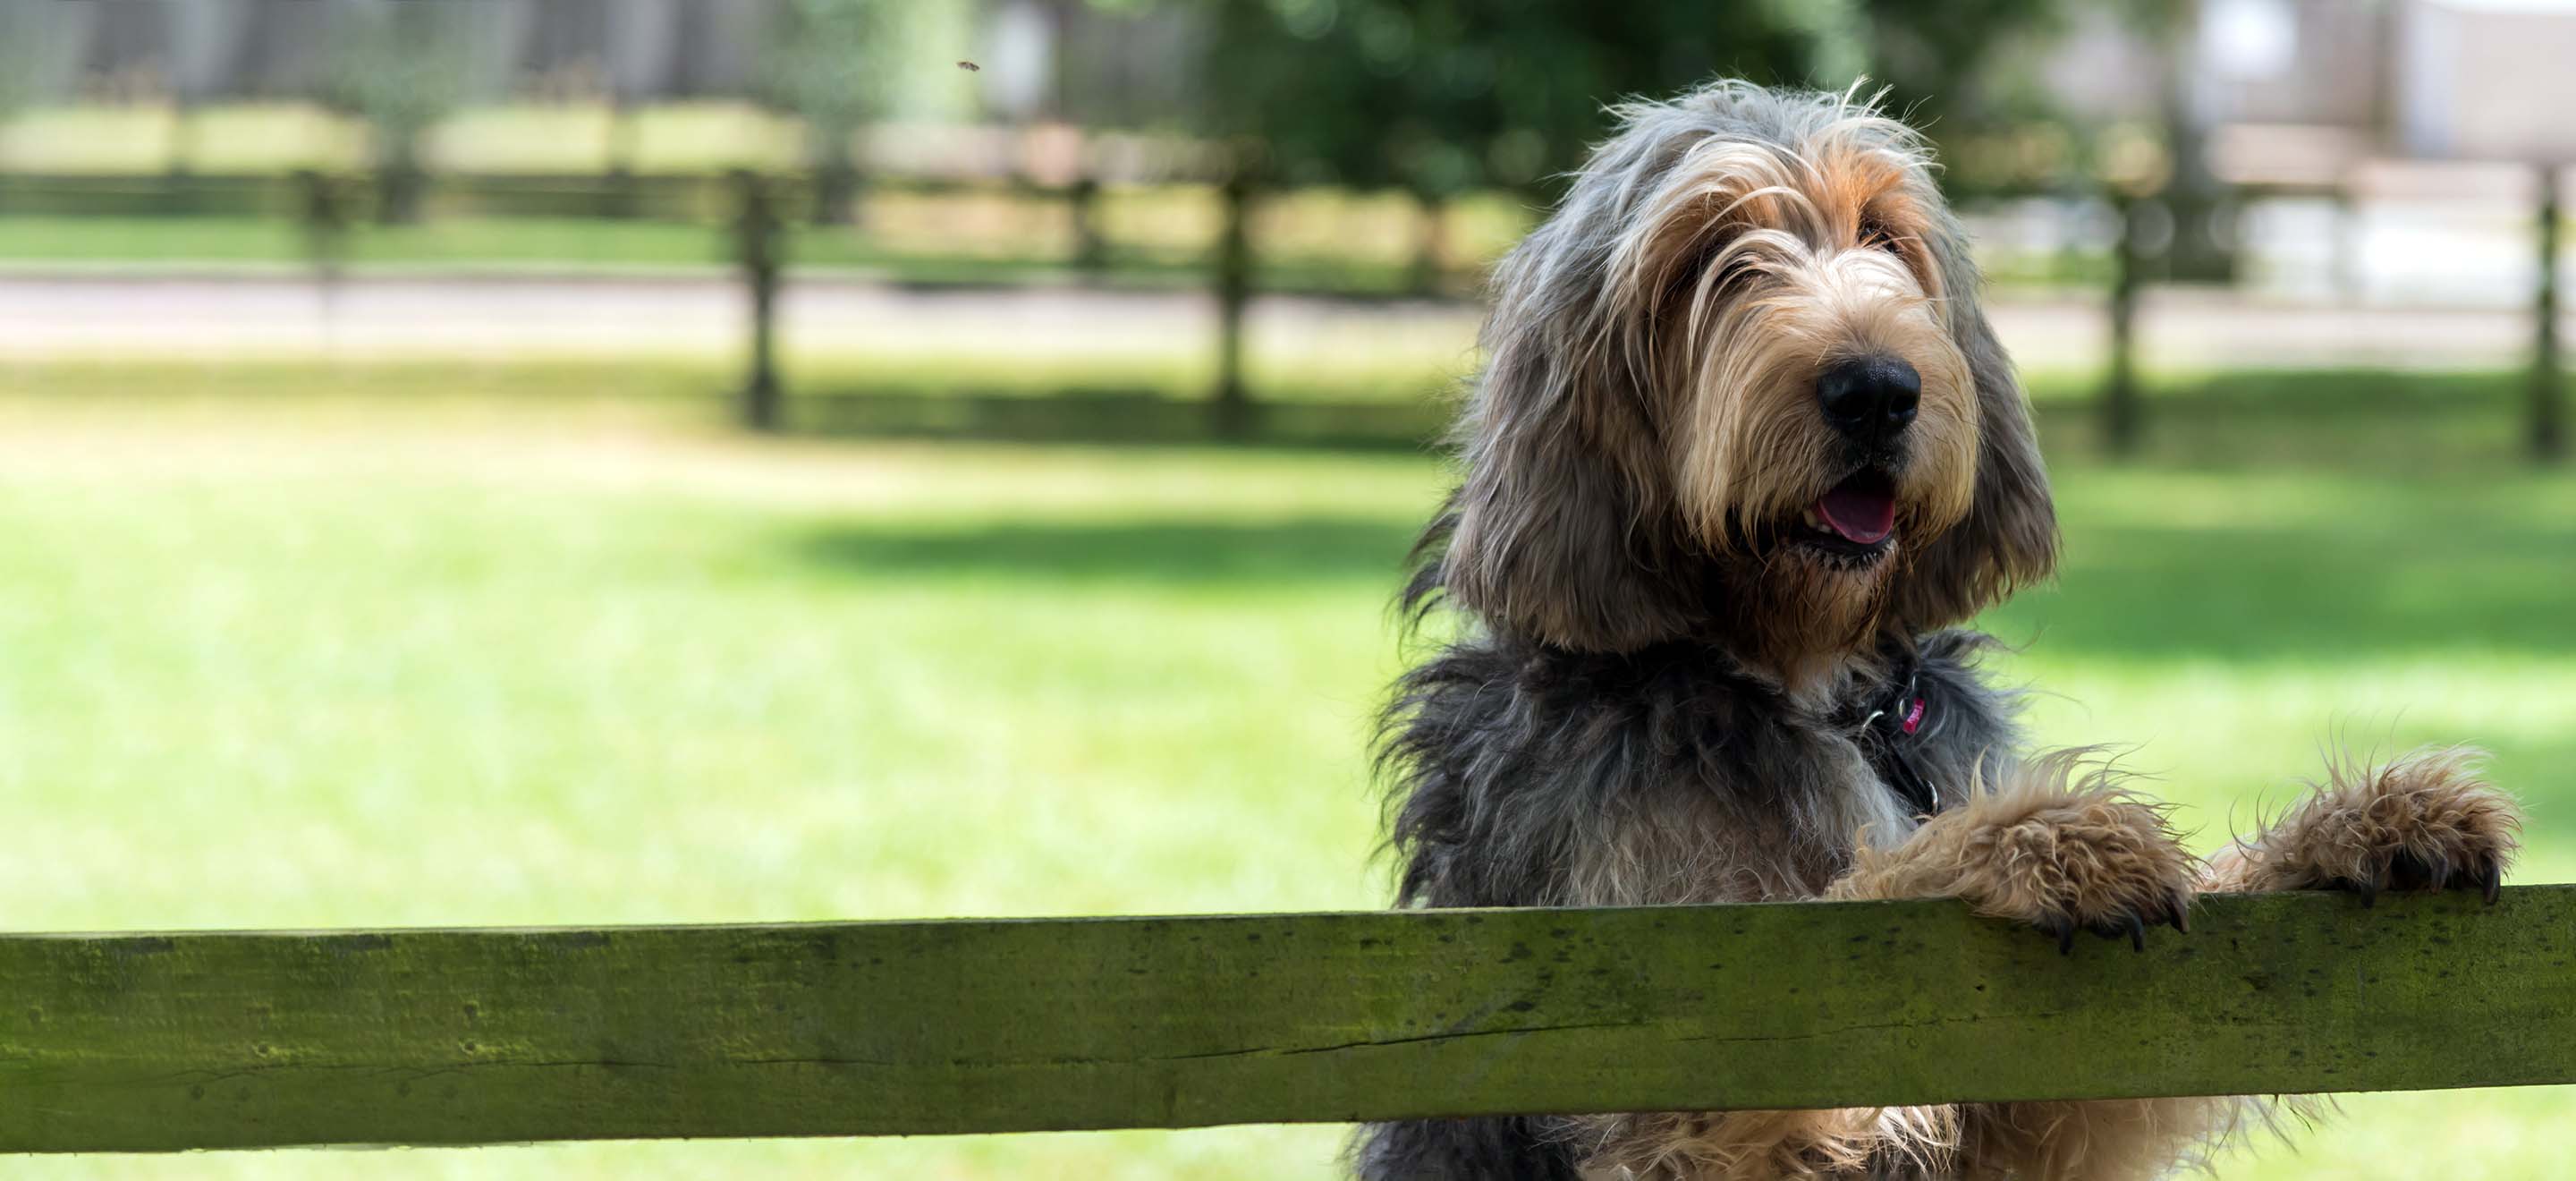 A Otterhound standing against a fence in a field outside image